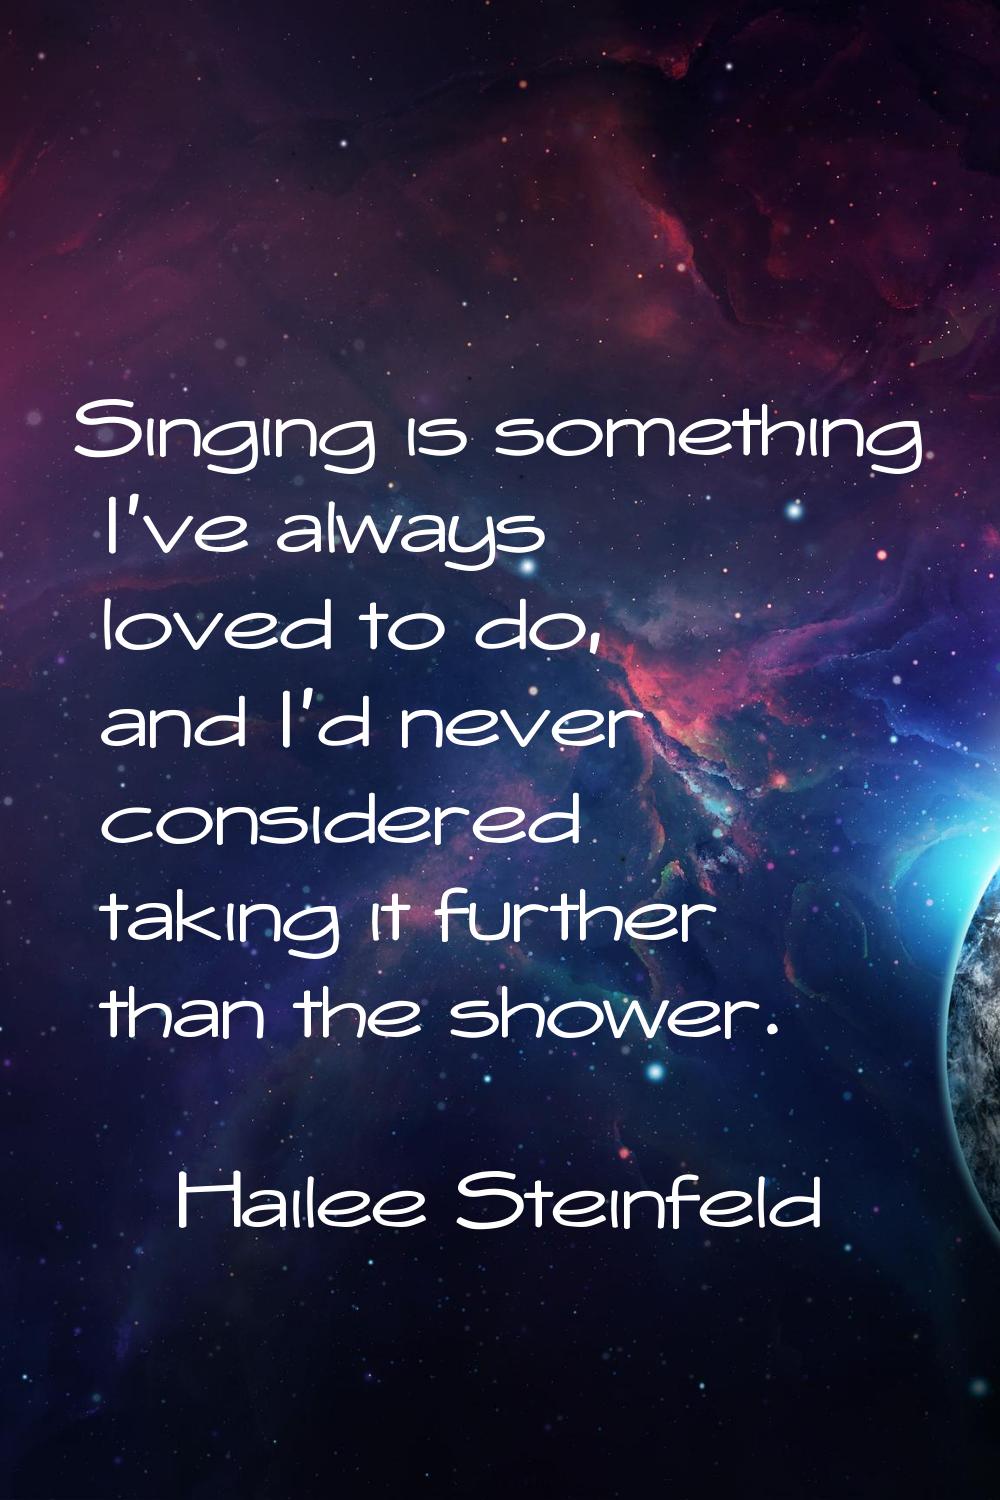 Singing is something I've always loved to do, and I'd never considered taking it further than the s